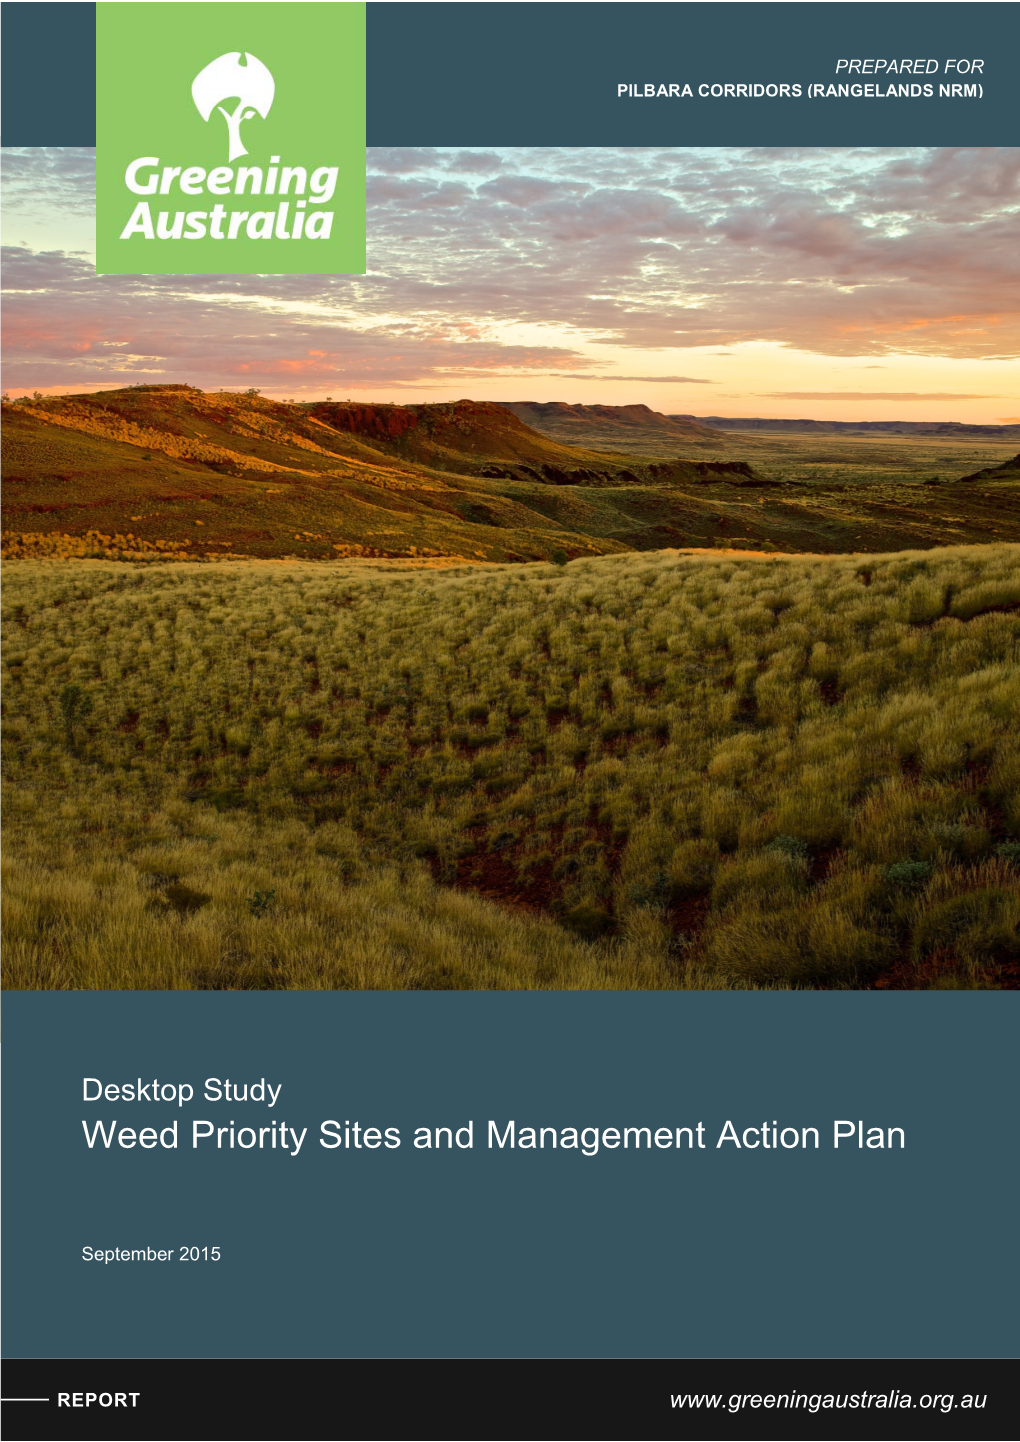 Weed Priority Sites and Management Action Plan